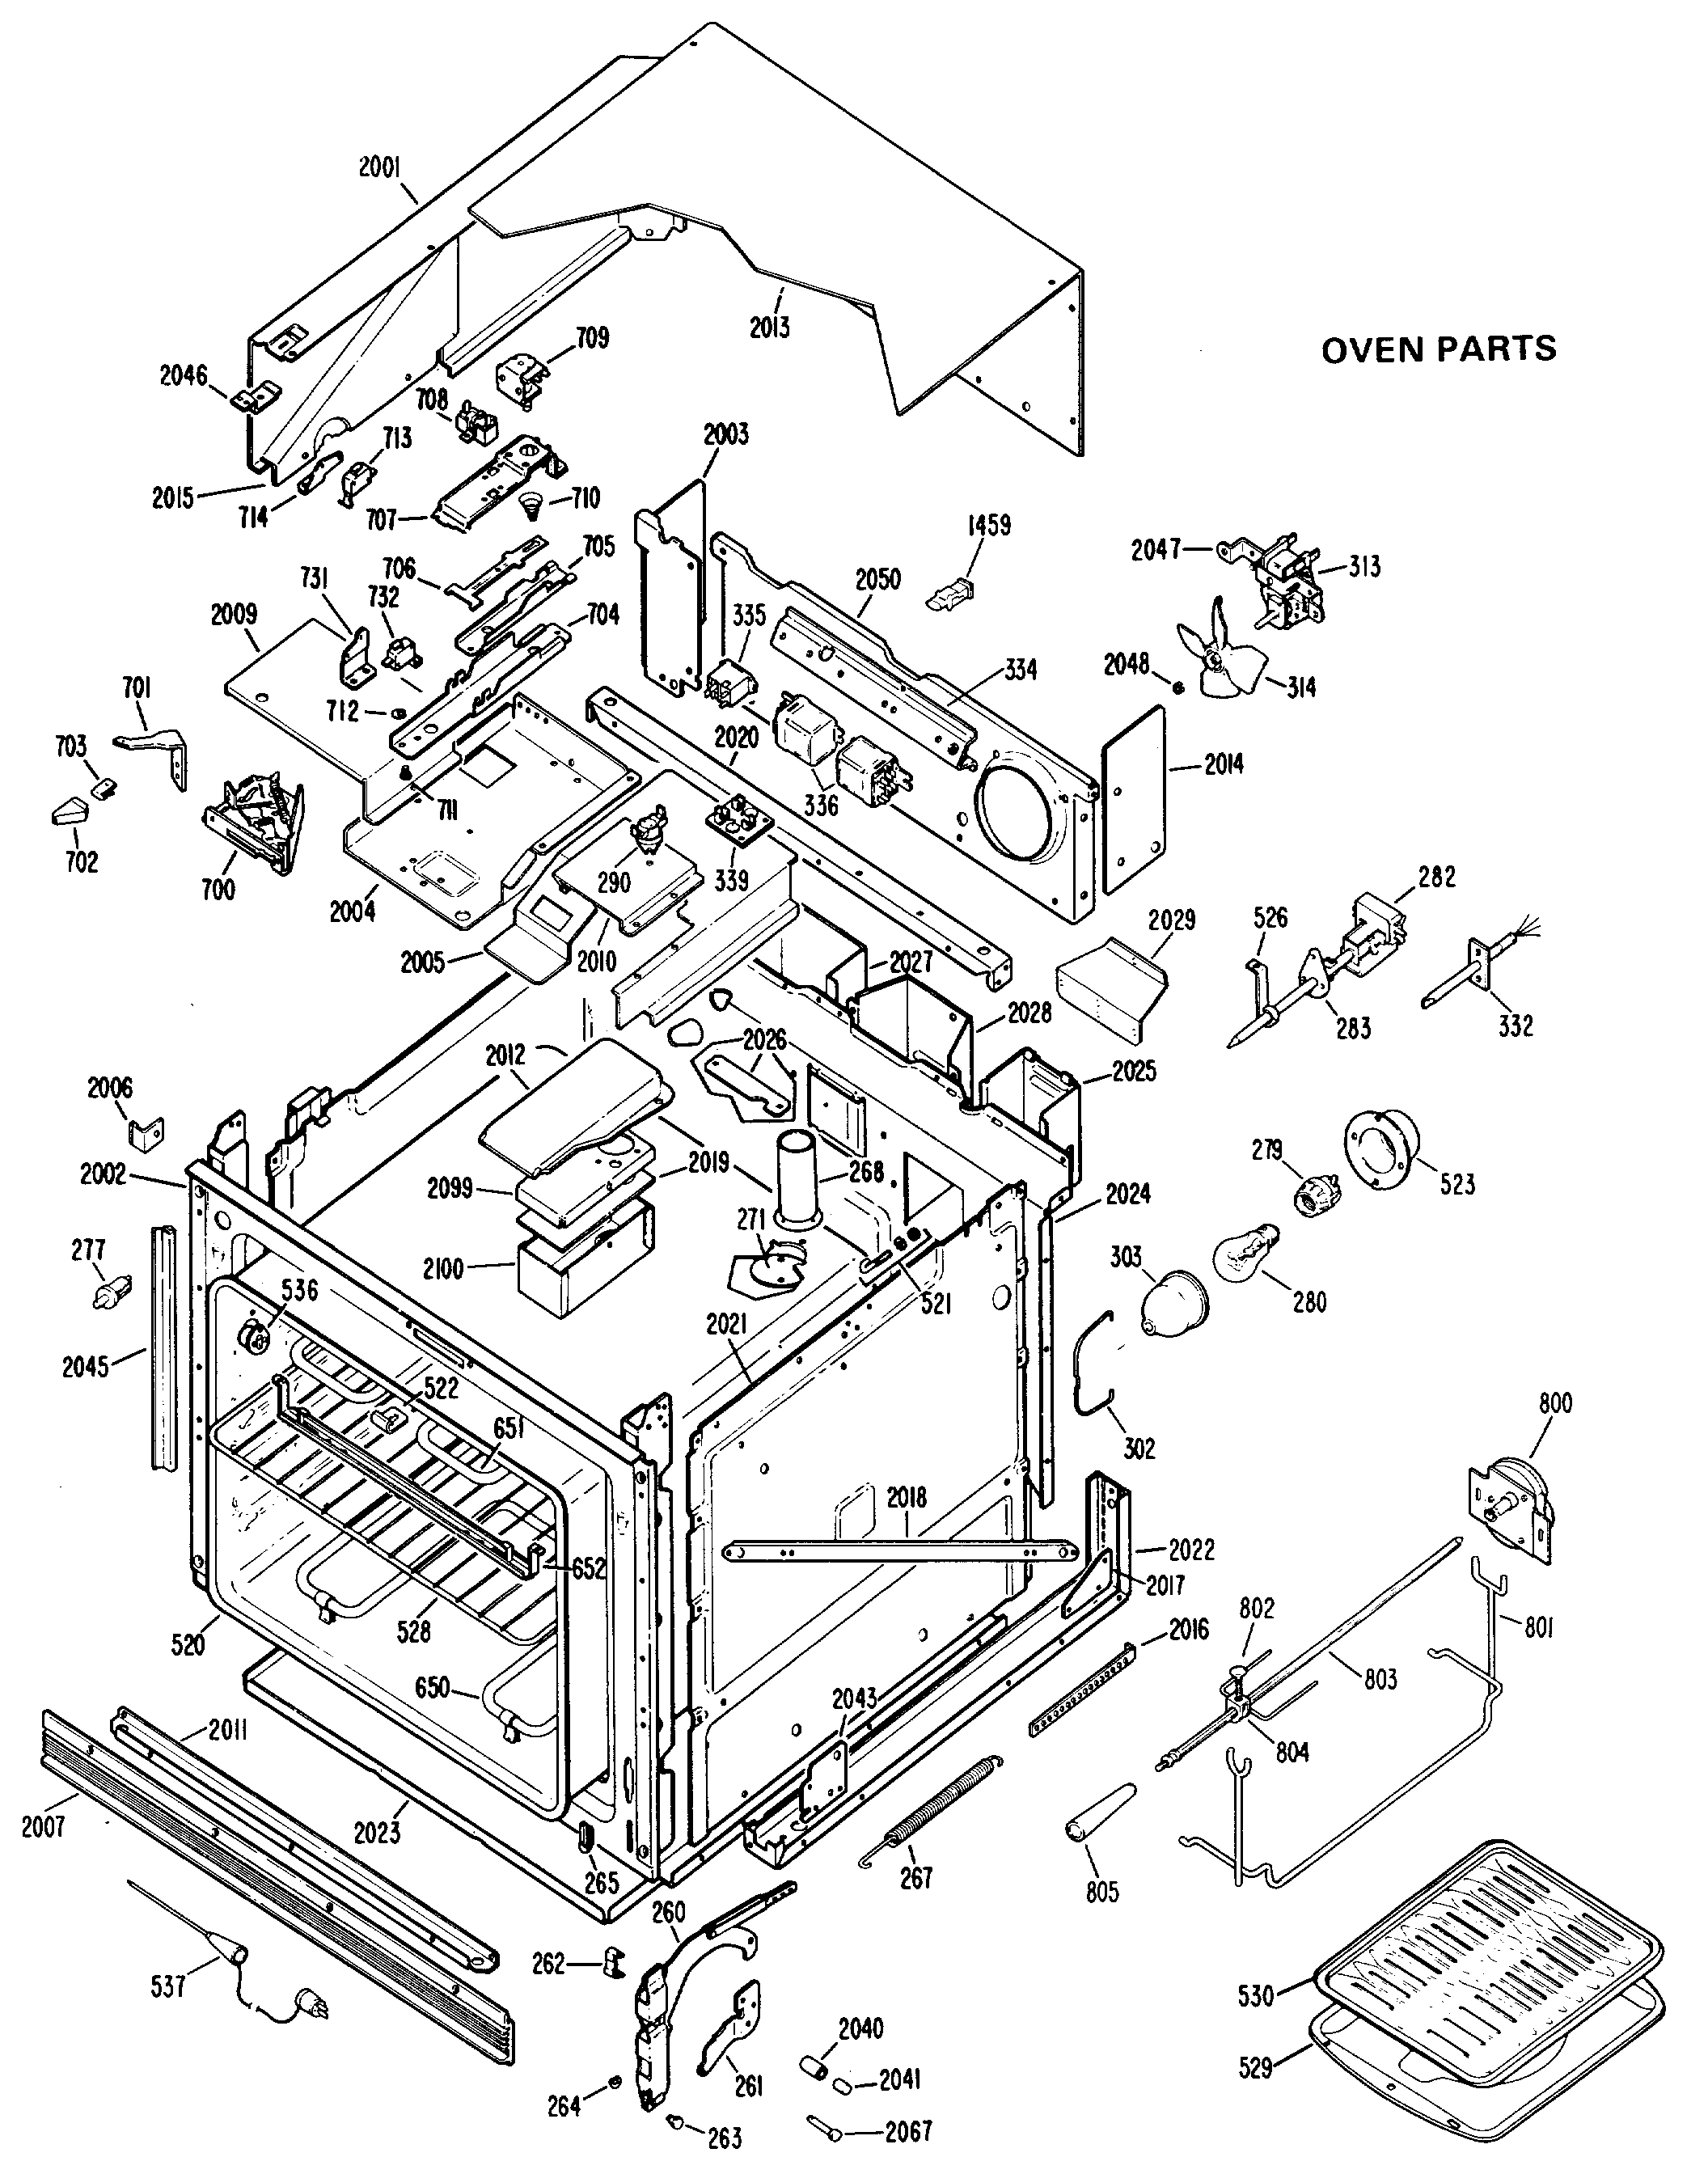 OVEN PARTS